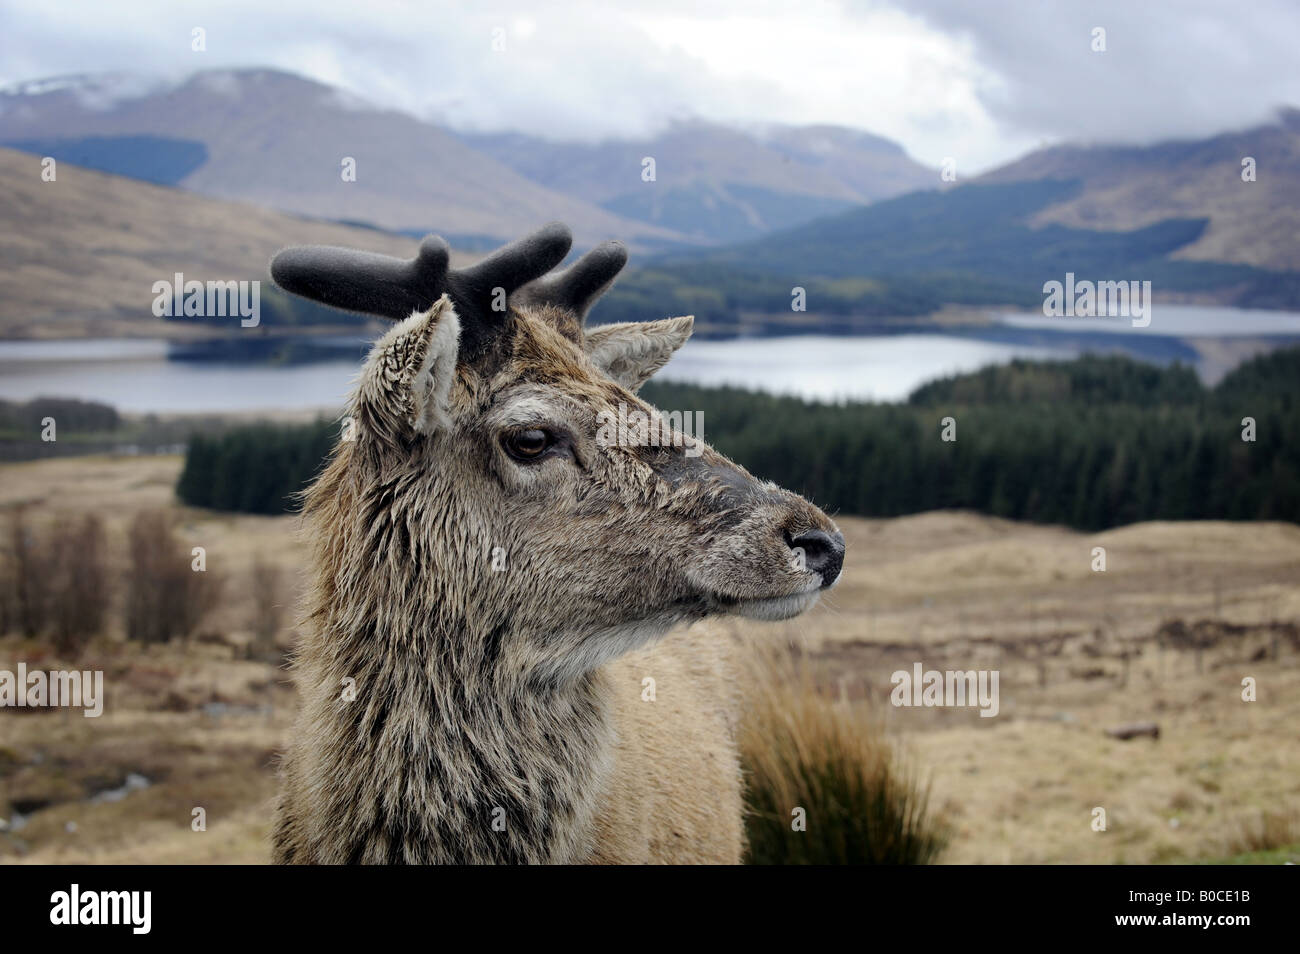 A SCOTTISH NATIVE DEER IN THE HIGHLANDS OF SCOTLAND,UK. Stock Photo